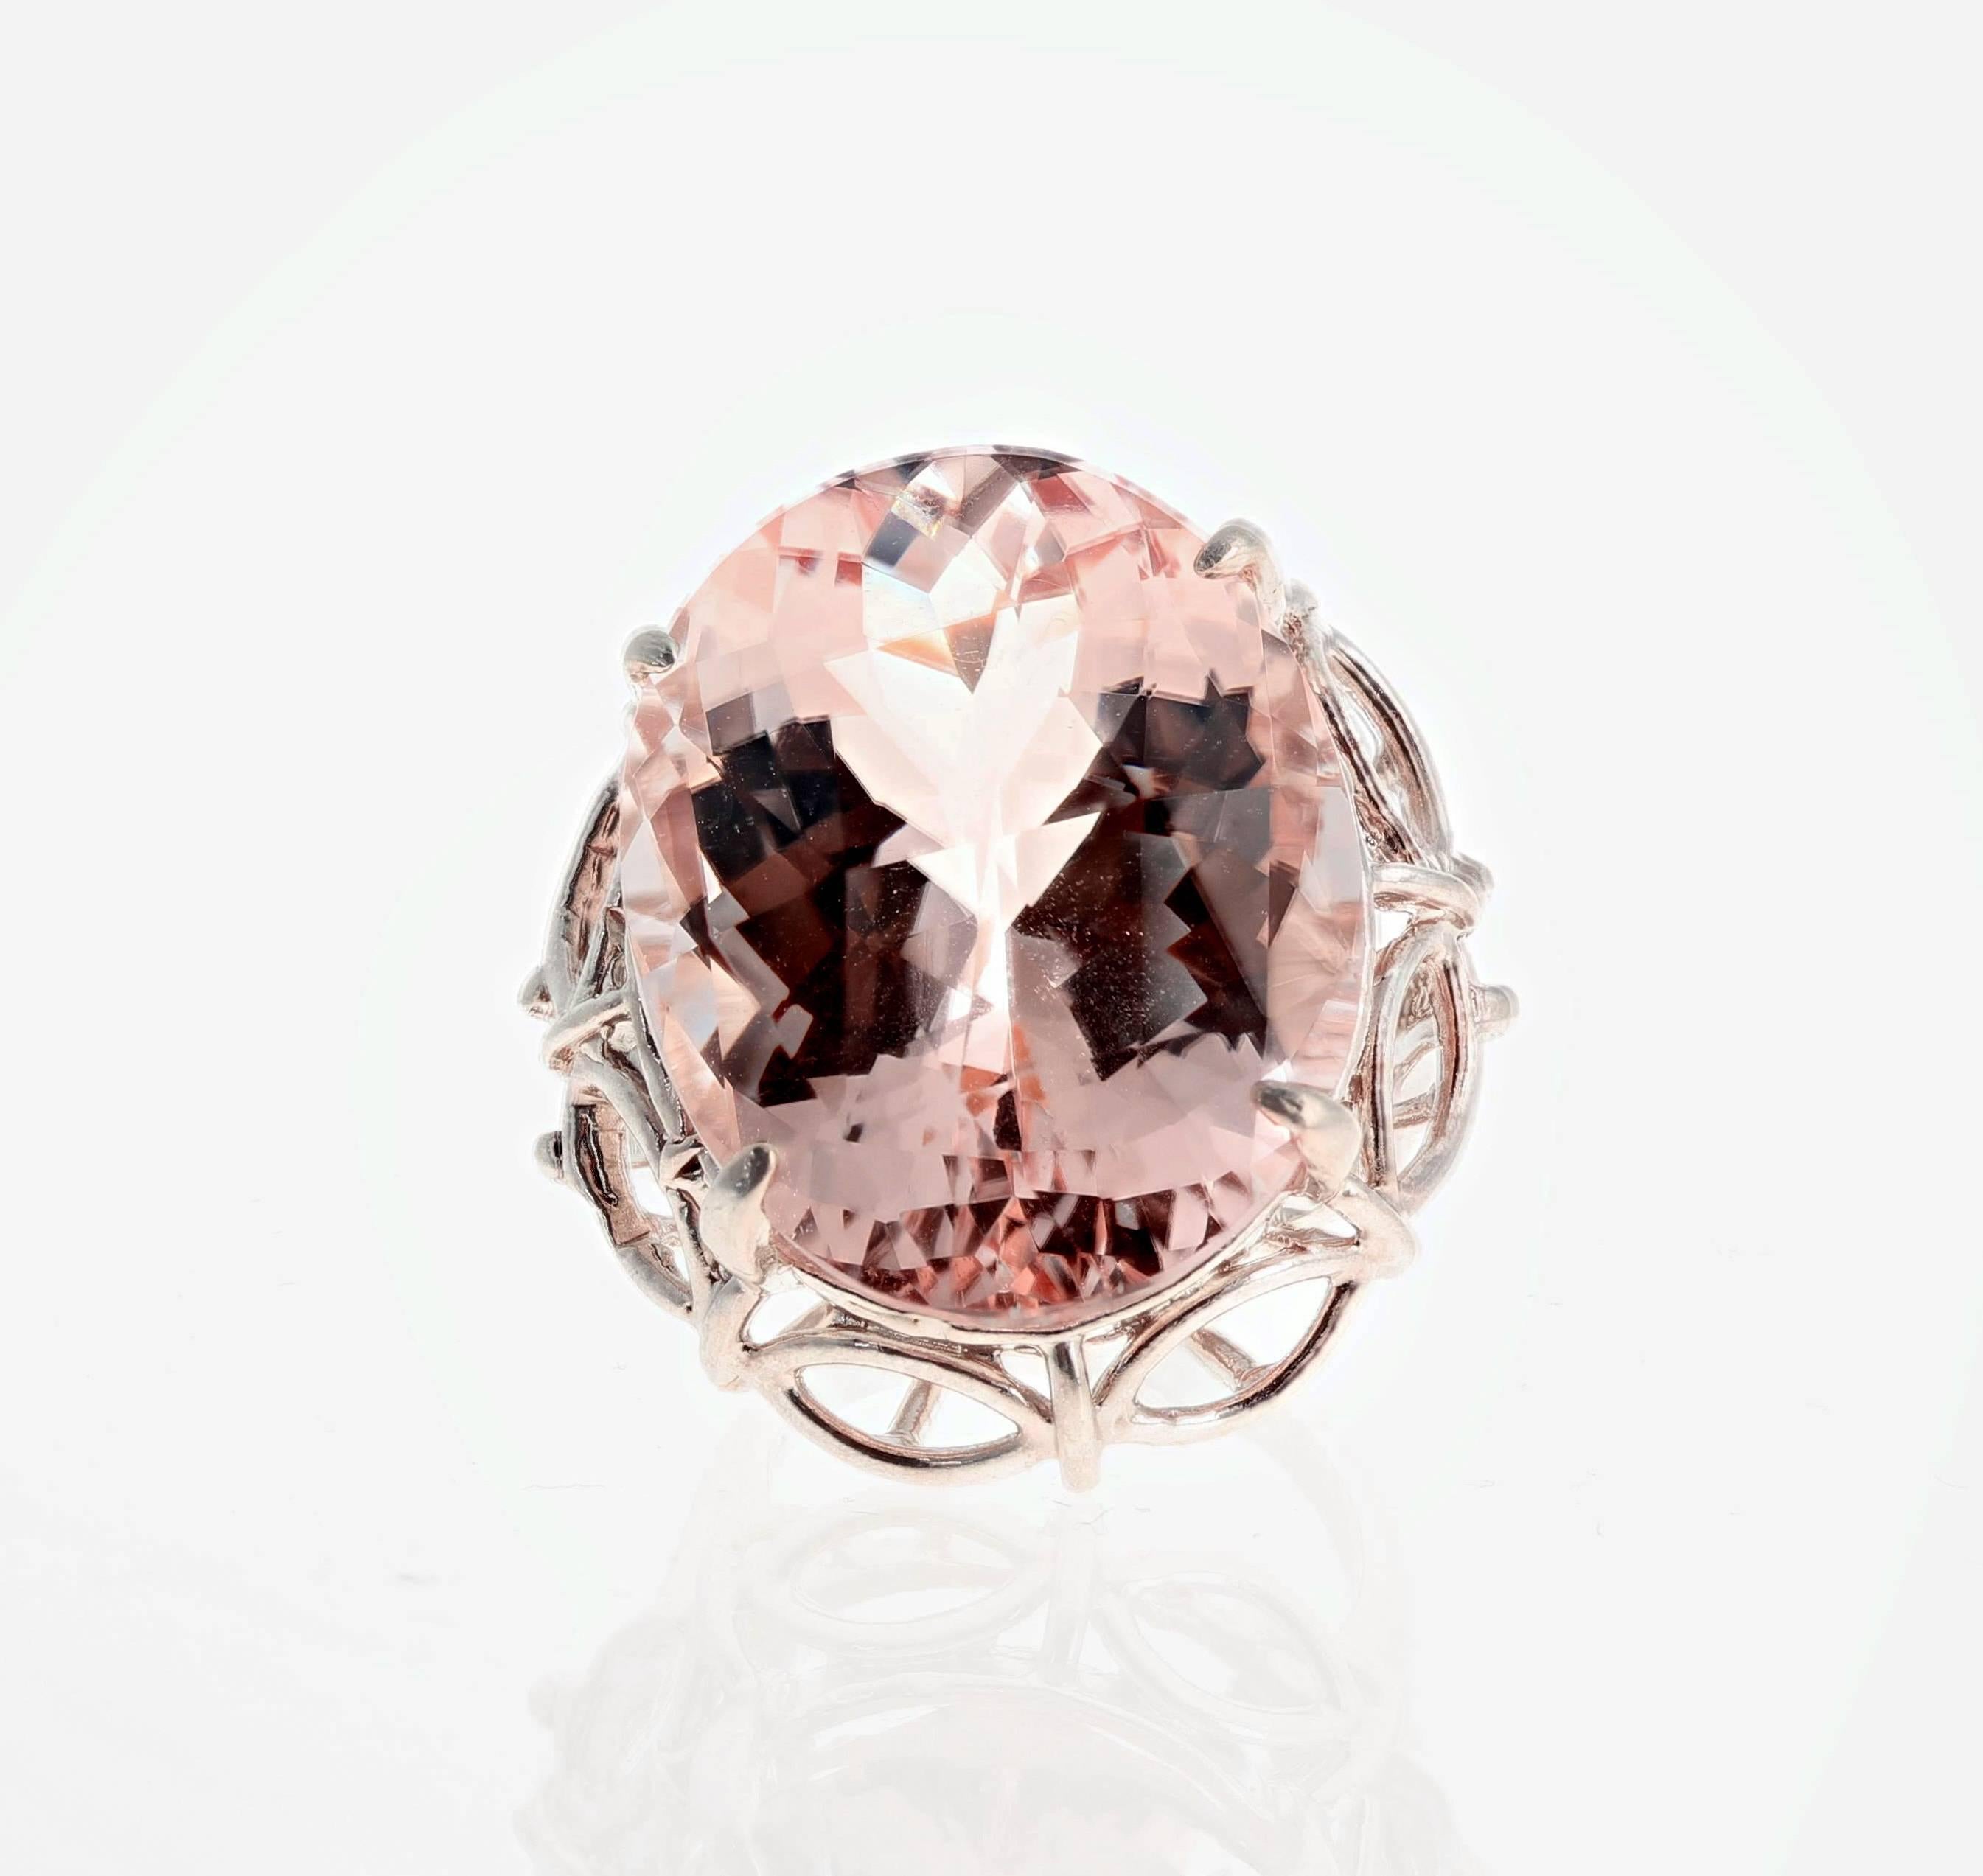 Huge gorgeous eye clean explosively sparkling 30 carat Morganite (24 mm x 18.9 mm) set in a sterling silver ring size 6 (sizable).    